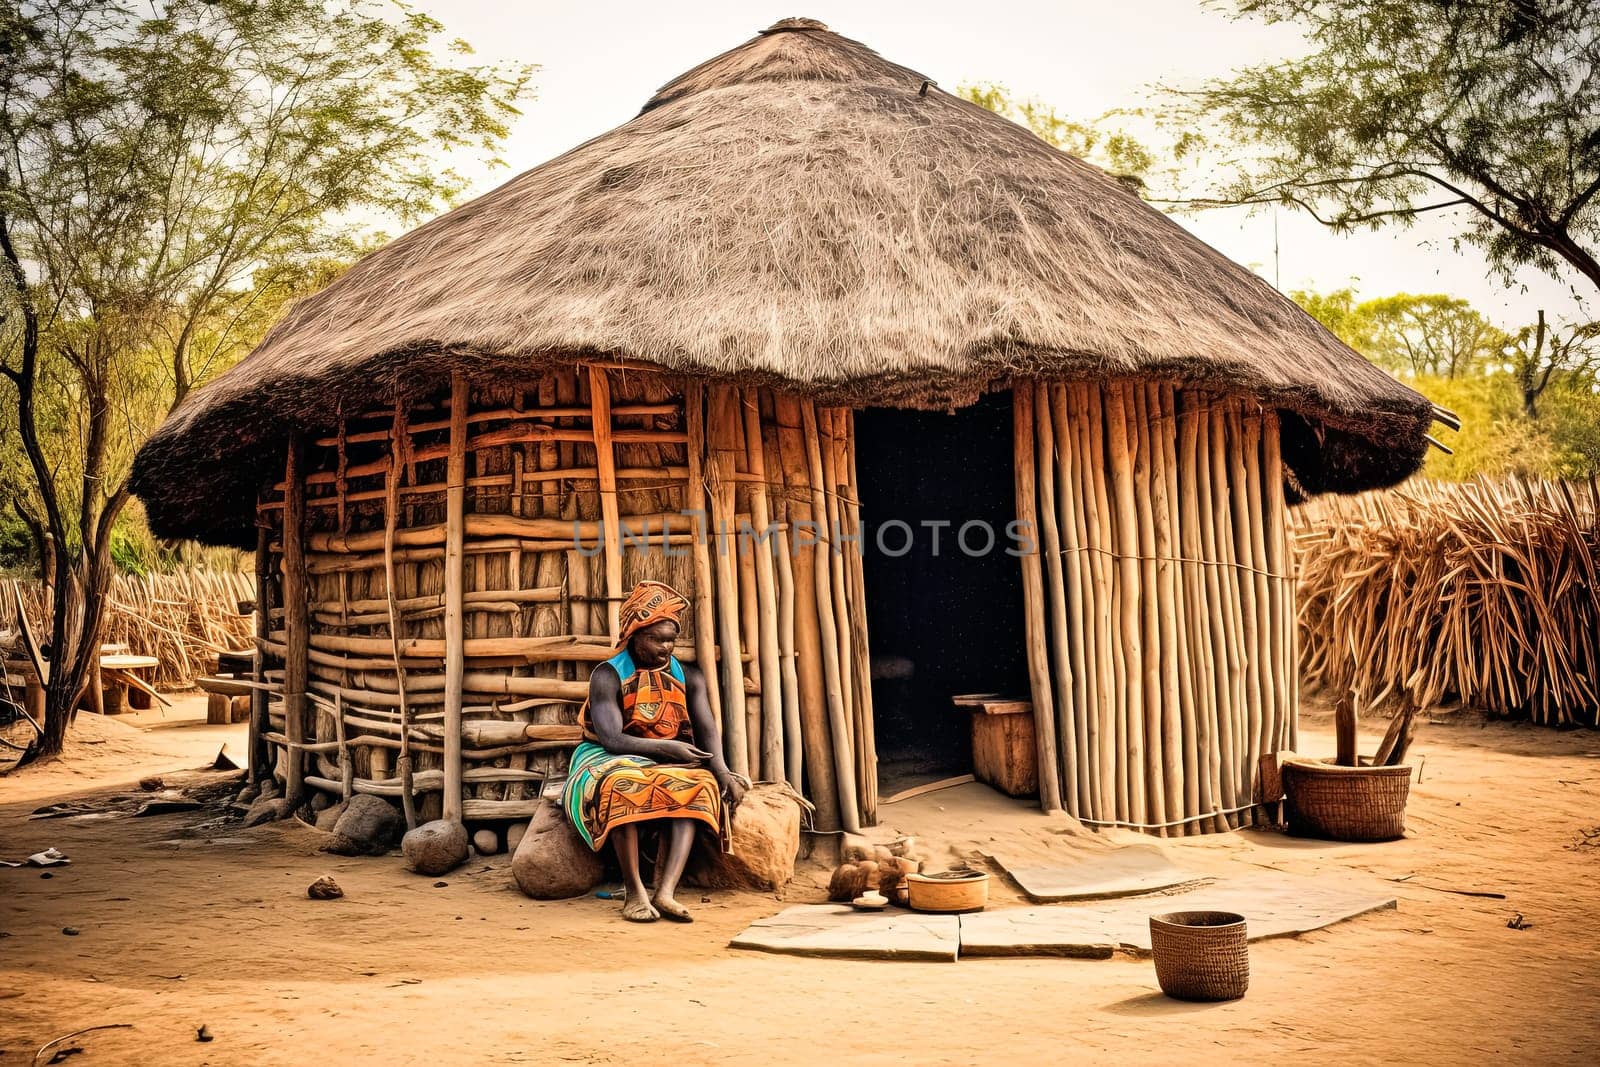 A beautiful traditional Ethiopian mud house with a thatched roof by Alla_Morozova93